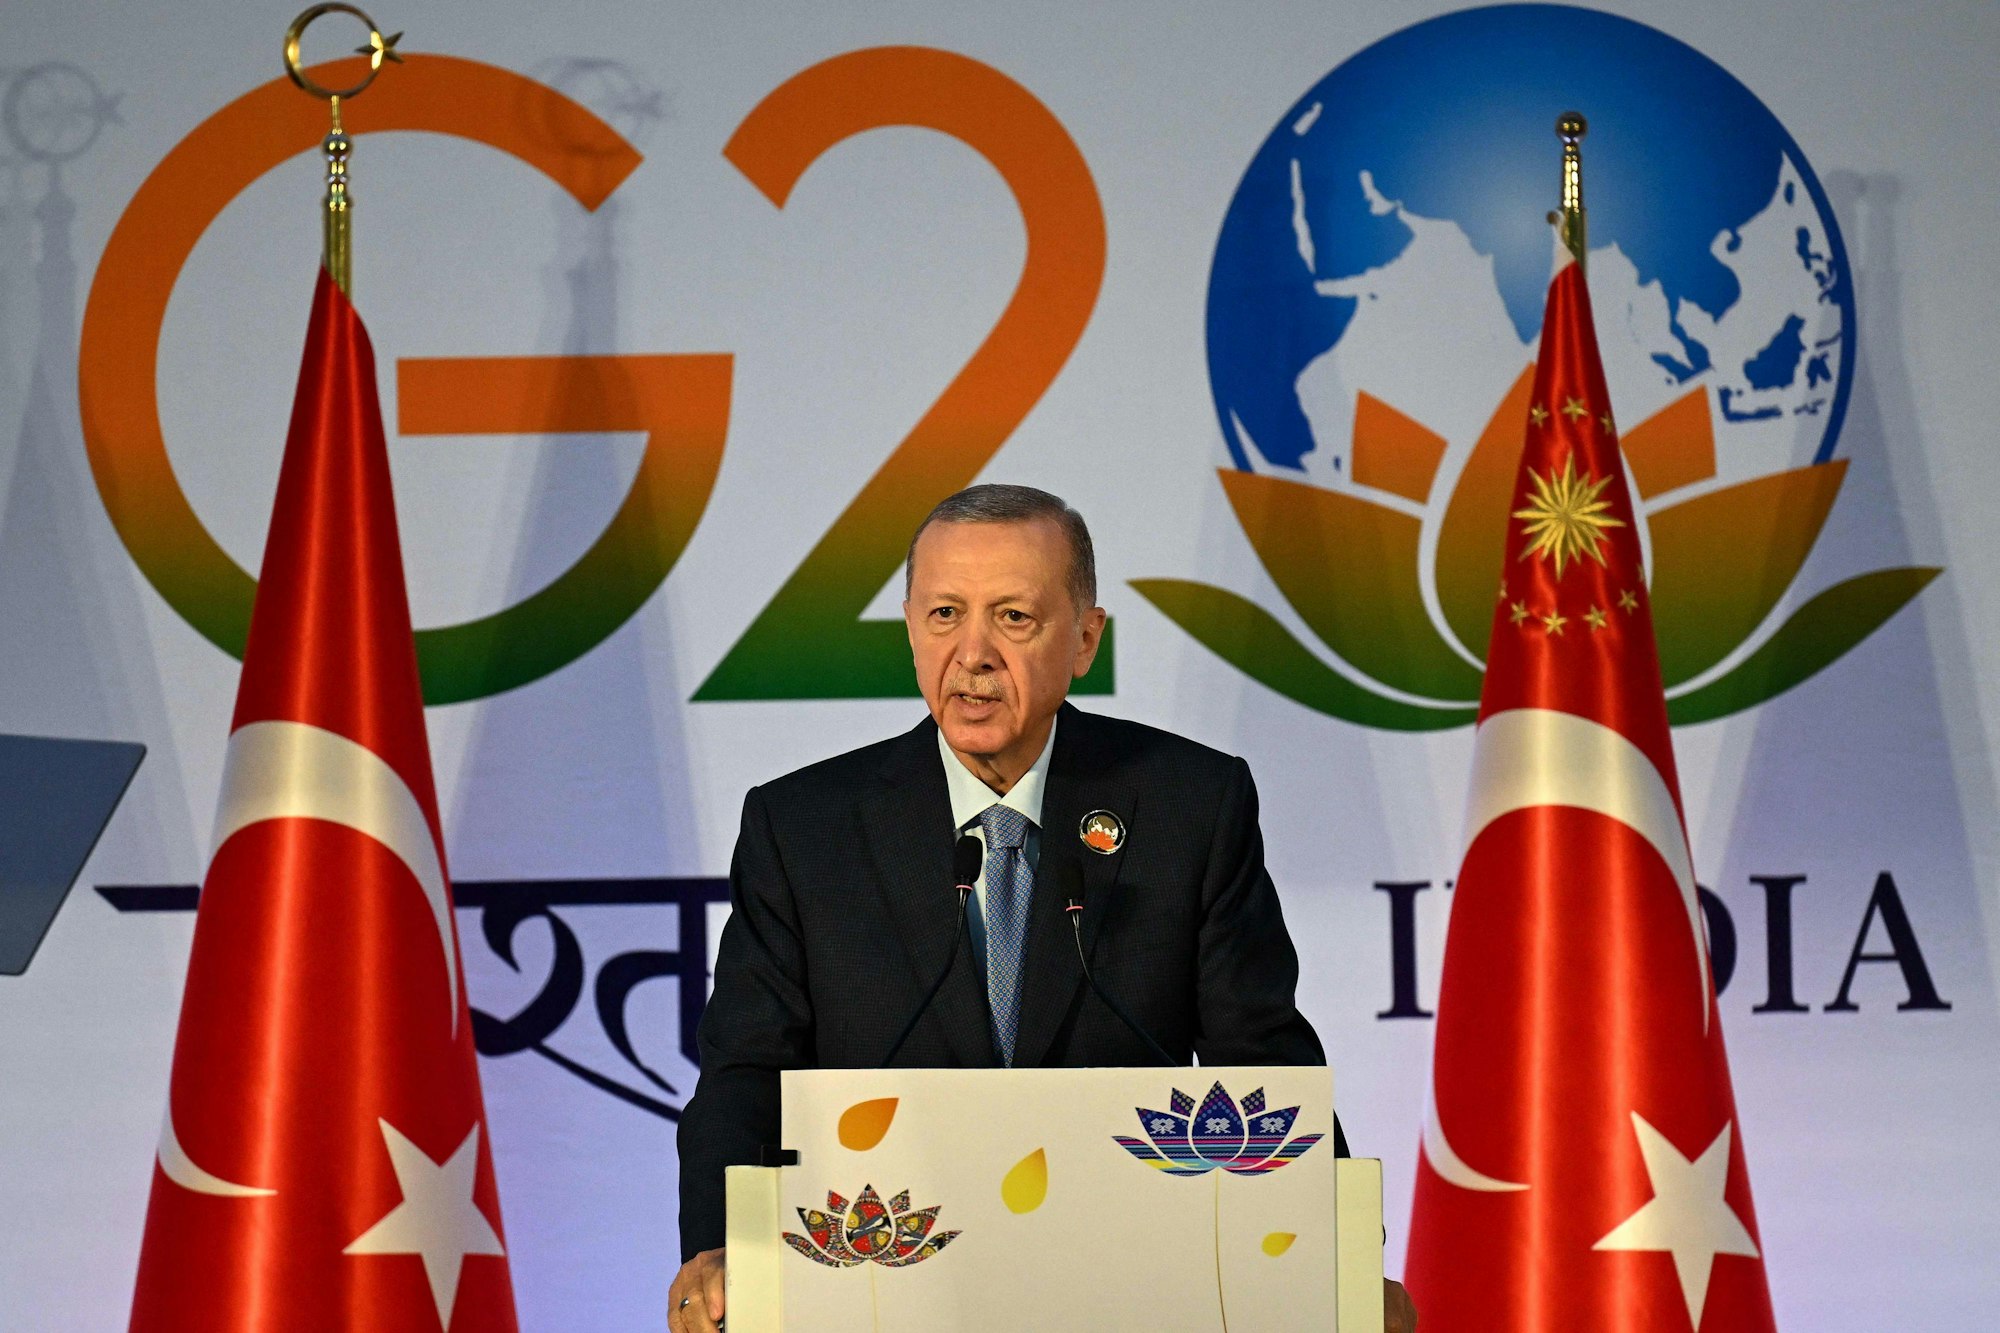 Turkey's President Recep Tayyip Erdogan speaks during a news conference after attending the G20 summit, in New Delhi on September 10, 2023. (Photo by Money SHARMA / AFP)